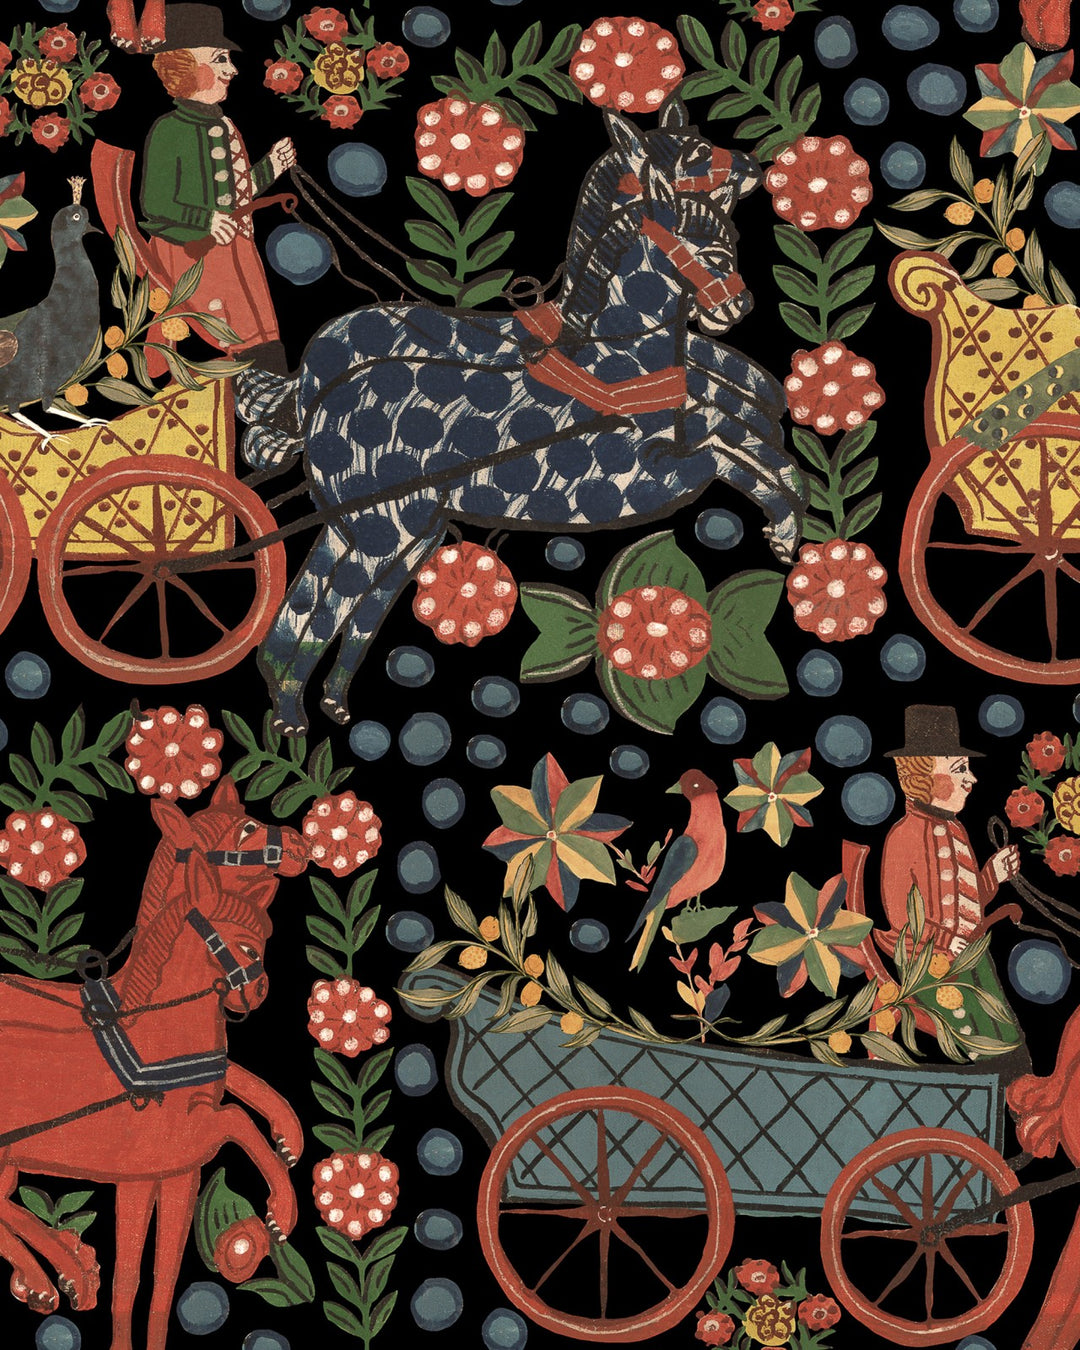 mind-the-gap-Tyrol-collection-wallpaper-WP20678-fasnacht-anthracite-Swiss-festival-scene-coaches-horseman-bright-Nordic-Folklore-style-Apres-SKi-Alpine-Chalet